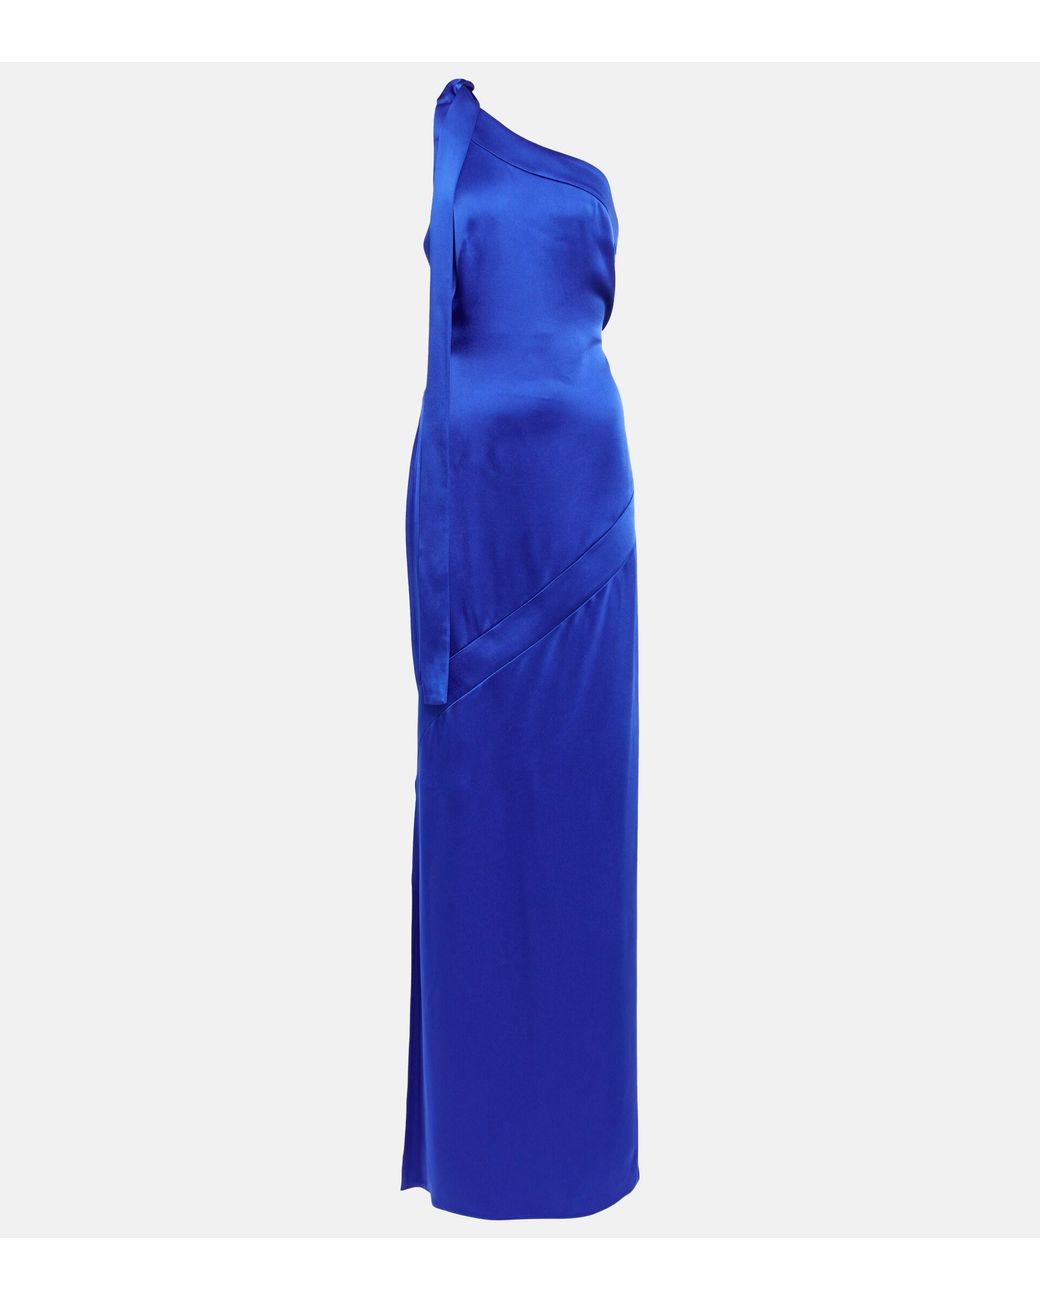 Tom Ford One-shoulder Satin Gown in Blue | Lyst